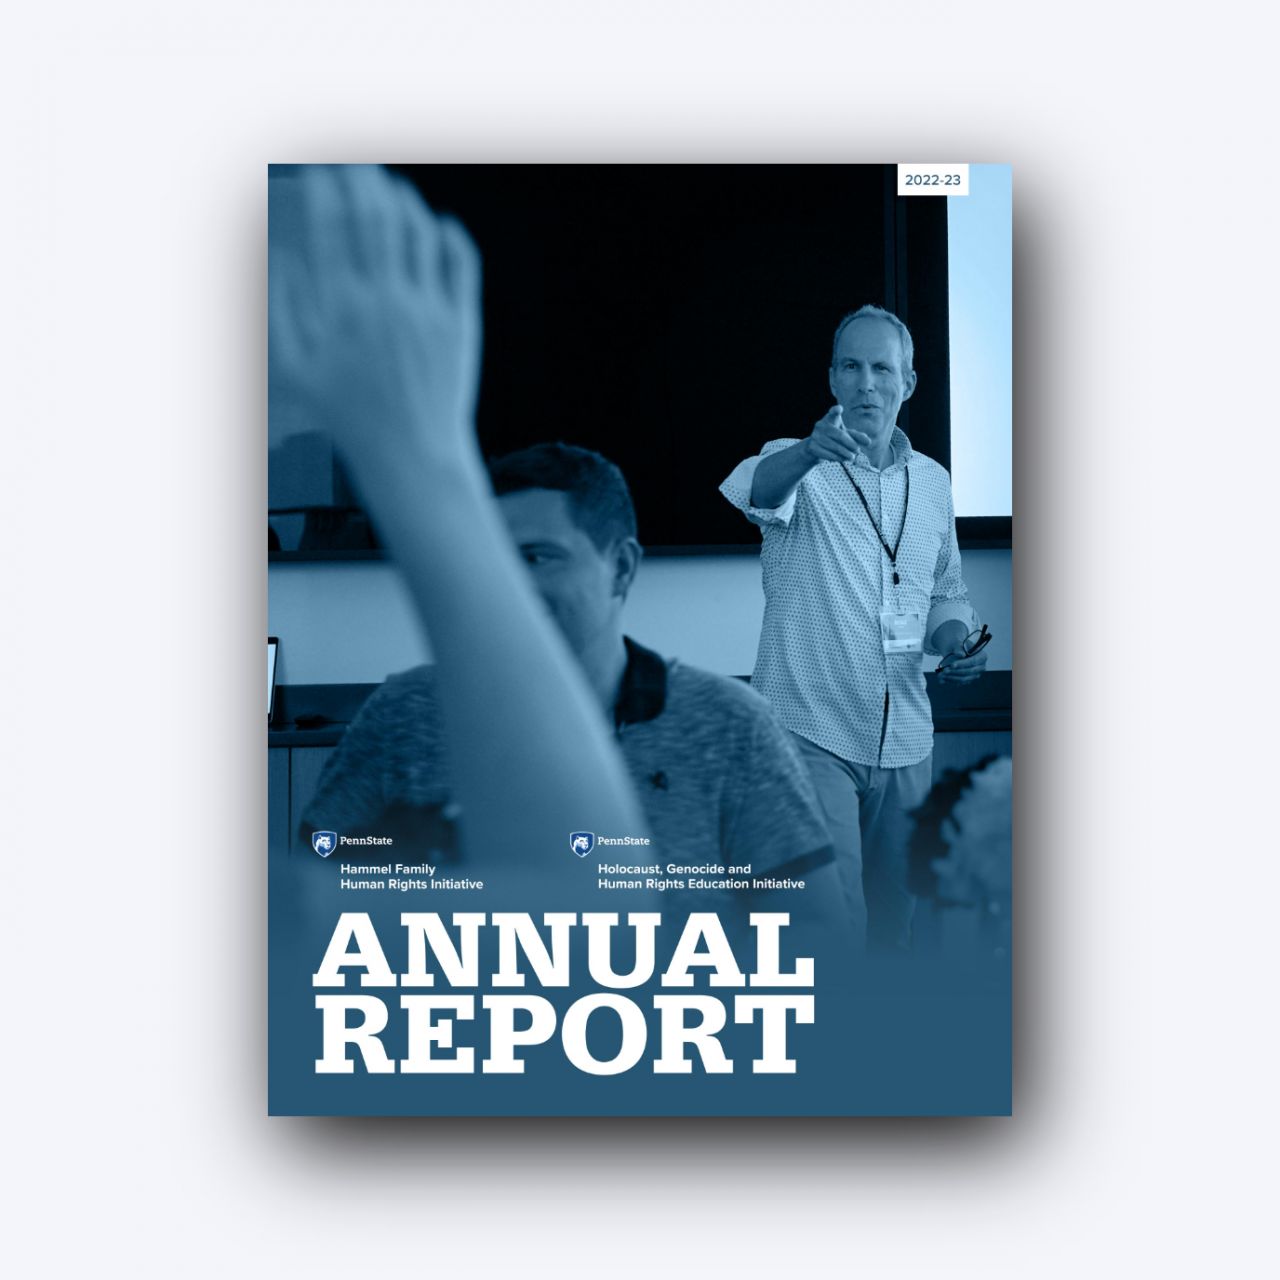 Man speaking to audience behind a blurred raised hand. In the bottom left corner, two marks above text "Annual Report"